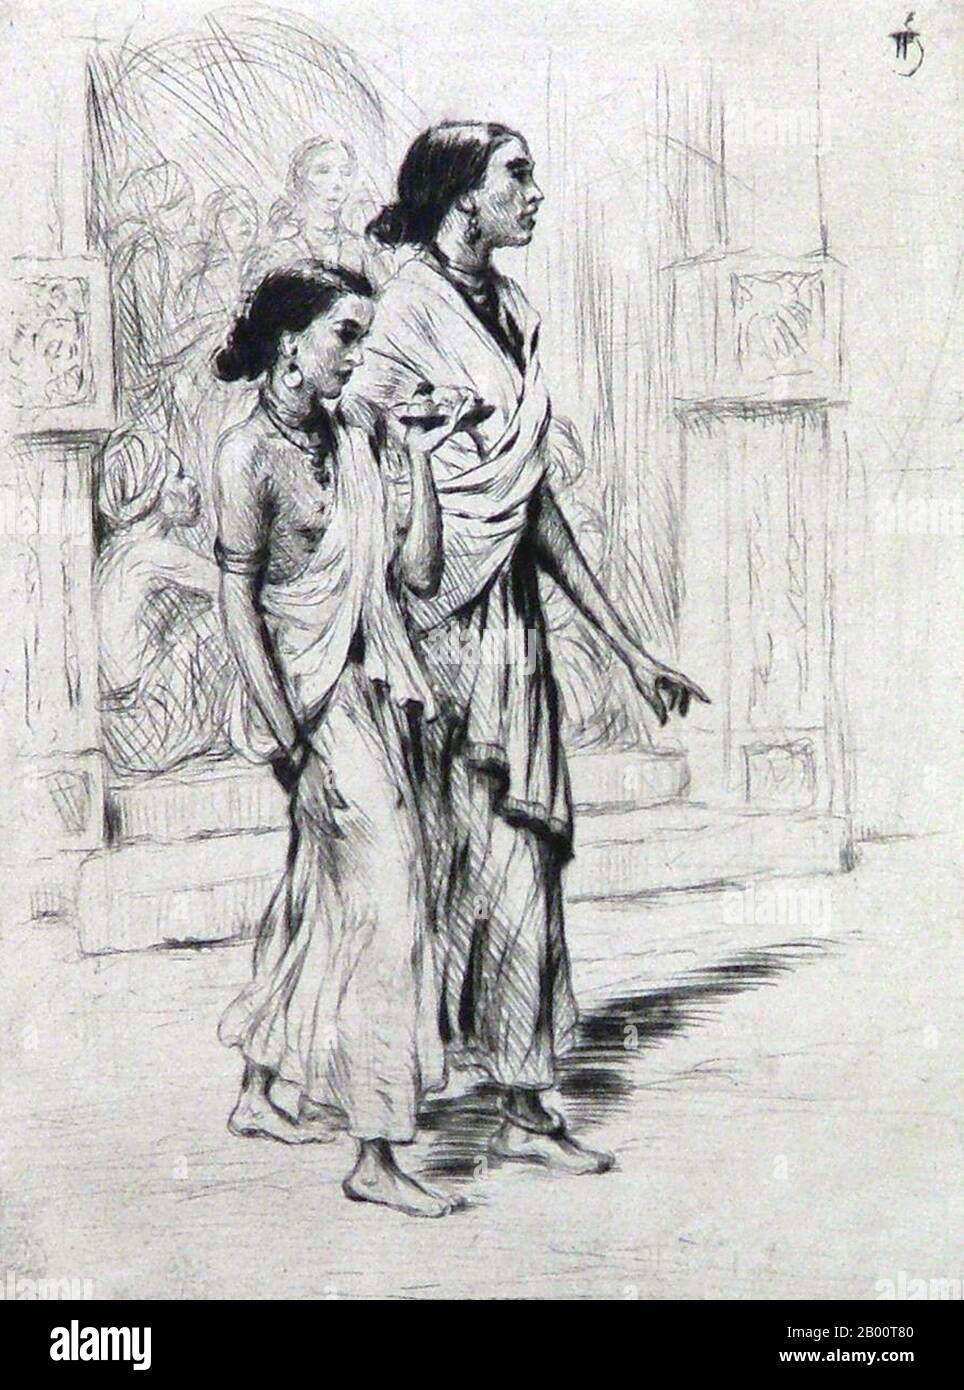 Sri Lanka/Czechoslovakia: 'Two Young Sinhalese Women'. Drawing by T. F. Simon (1877-1942), c. 1928.  Tavik Frantisek Simon (1877–1942), was a Czech painter, etcher, and woodcut artist. Although based mainly in Europe, his extensive travels took him to Morocco, Ceylon (now Sri Lanka), India, and Japan, images of all of which appear in his  artistic work. He died in Prague in 1942. Largely ignored during the Communist era in Czechoslovakia, his work has received greater attention in recent years. Stock Photo